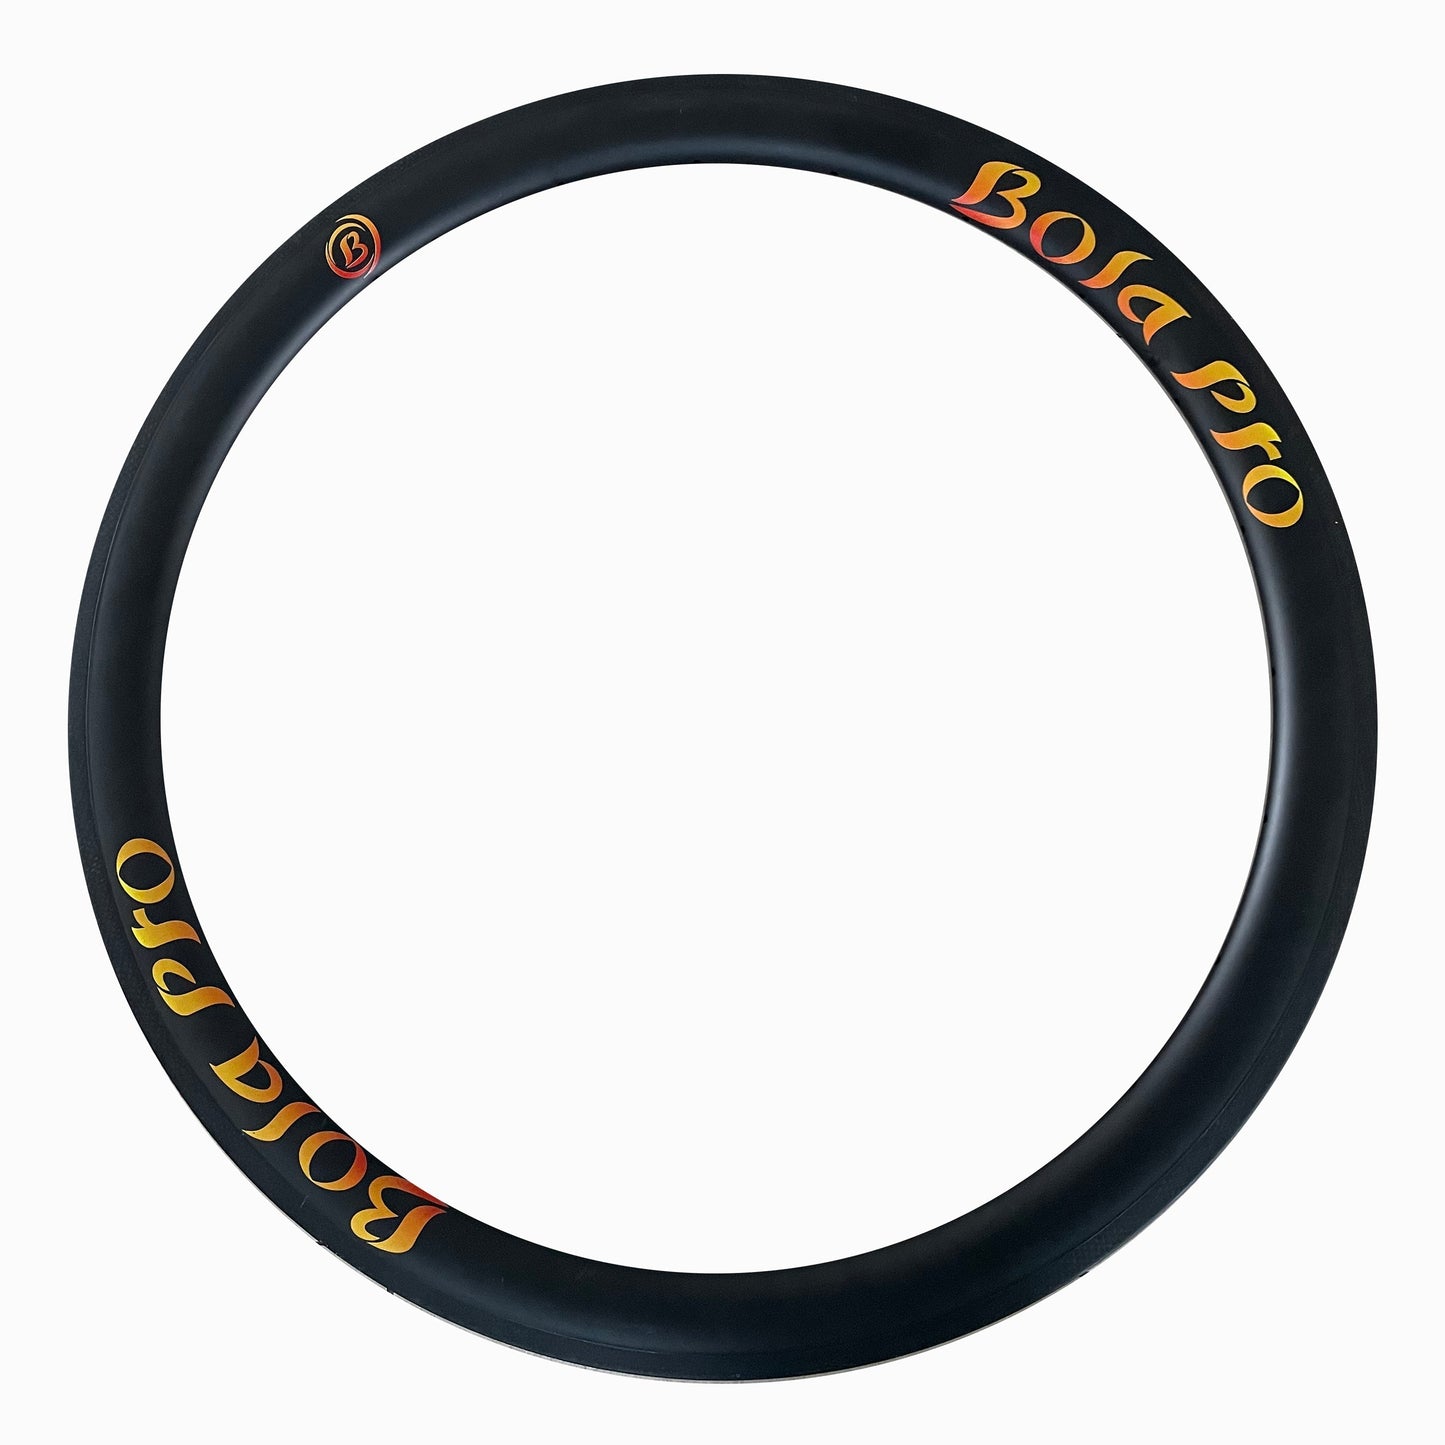 Tubeless  carbon rims 60mm profile  25mm wide for Disc Brake